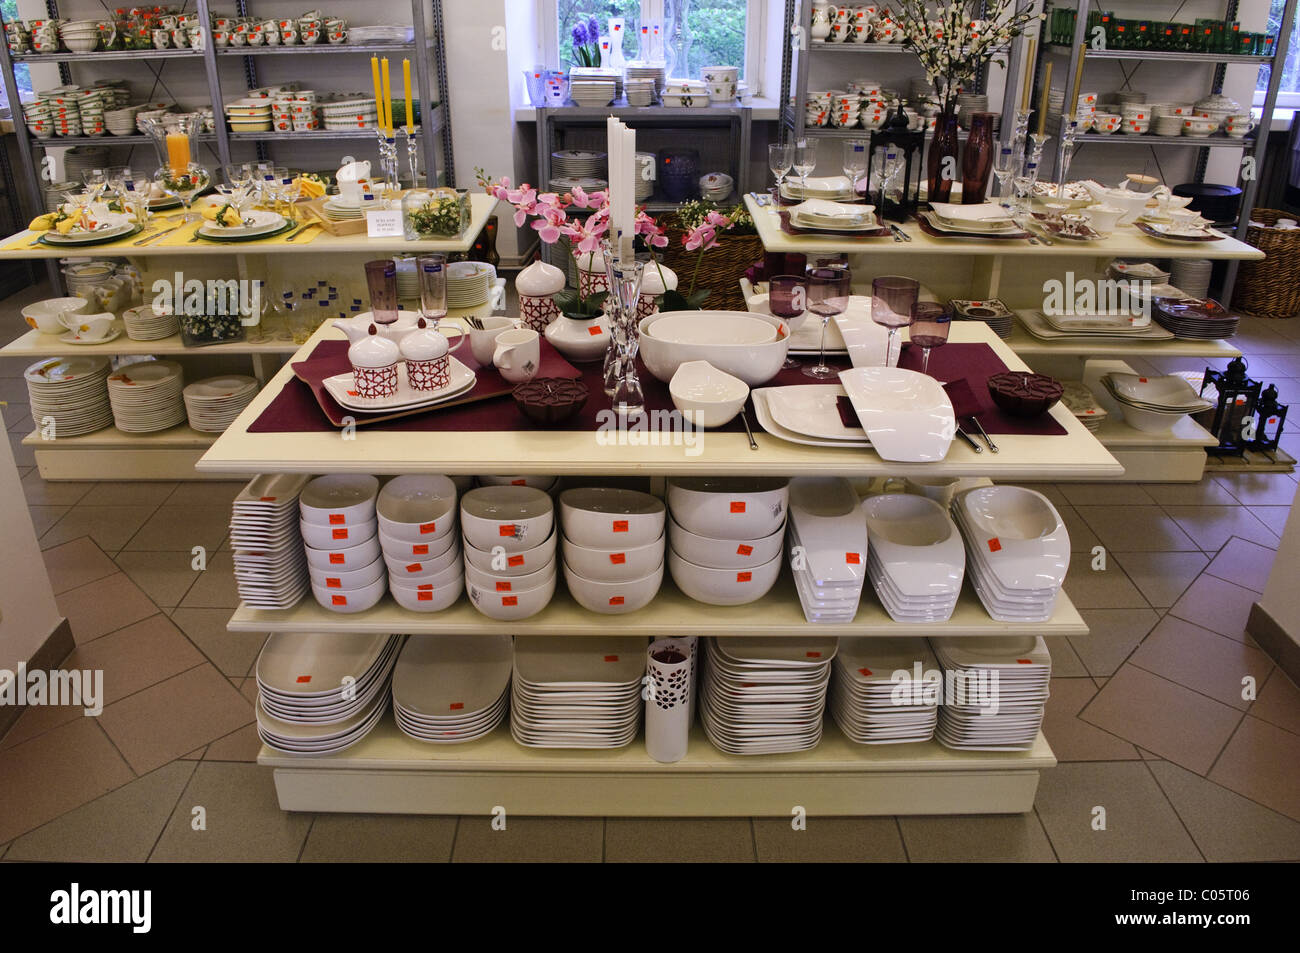 Villeroy & Boch china shop factory outlet at Wadgassen, Germany Stock Photo